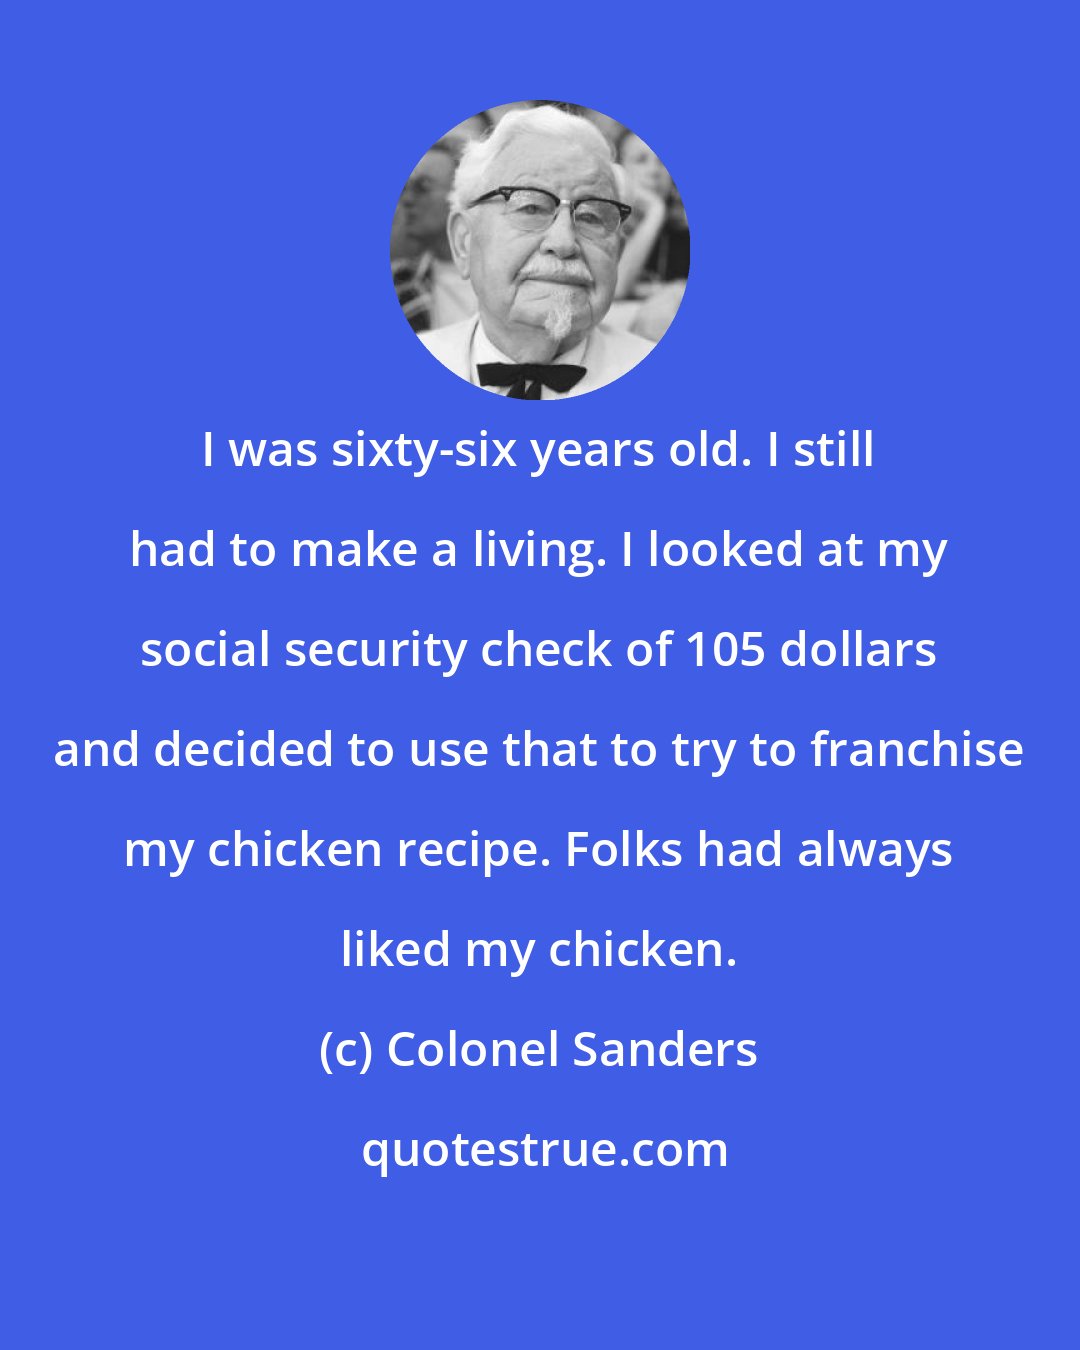 Colonel Sanders: I was sixty-six years old. I still had to make a living. I looked at my social security check of 105 dollars and decided to use that to try to franchise my chicken recipe. Folks had always liked my chicken.